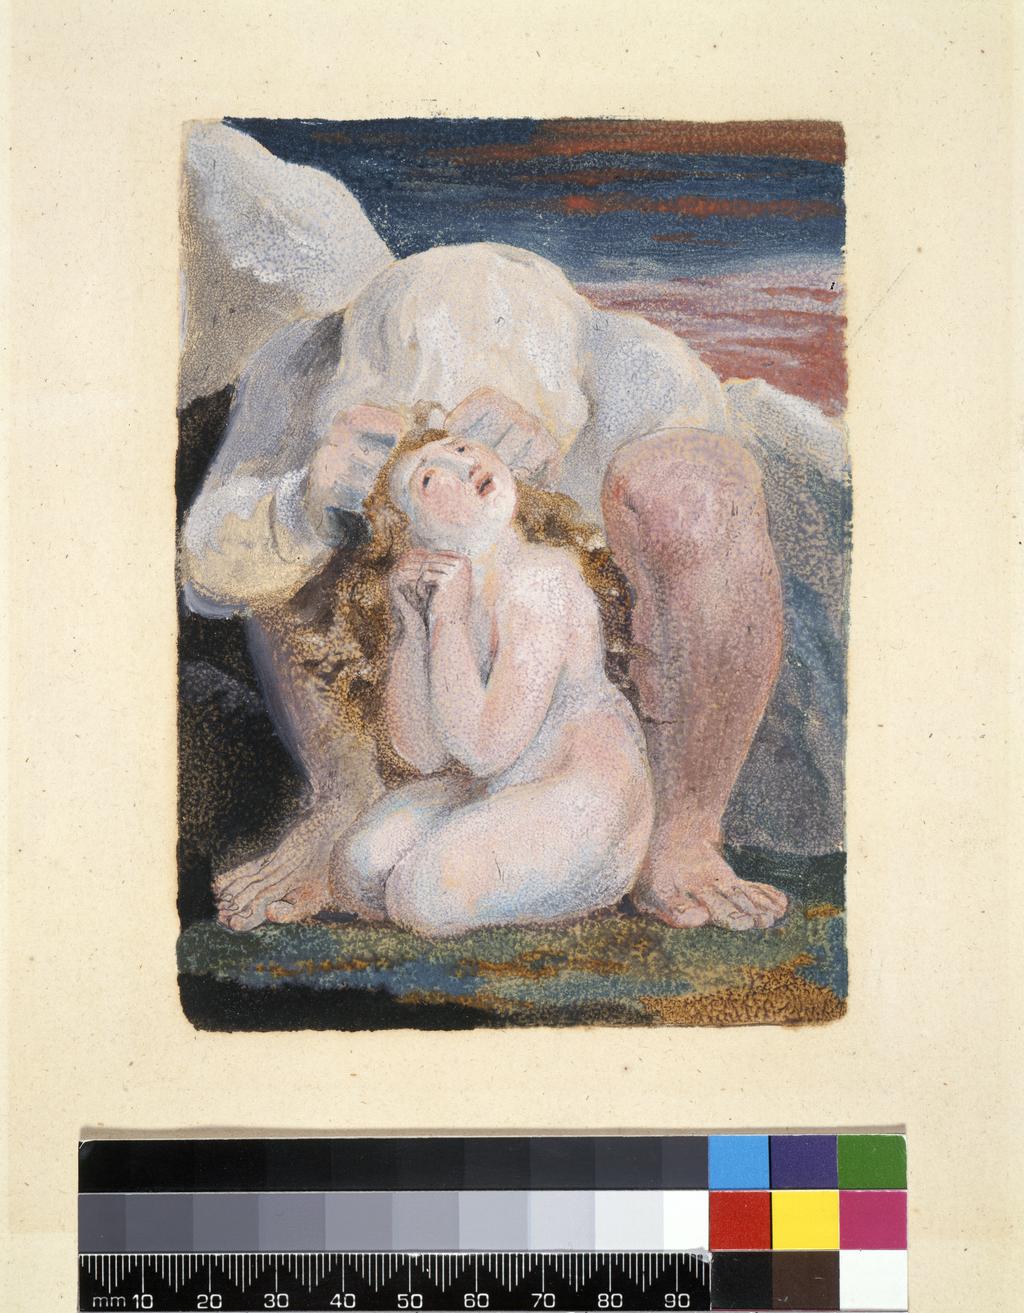 An image of Frontispiece, The Book of Ahania. Blake, William (British, 1757-1827). Etching, colour printing, coloured ink on paper, plate height 137 mm, plate width 100 mm; sheet height 283 mm, sheet width 233 mm, 1795. Production Notes: Frontispiece to the unique existing copy kept in the Library of Congress, Washington.